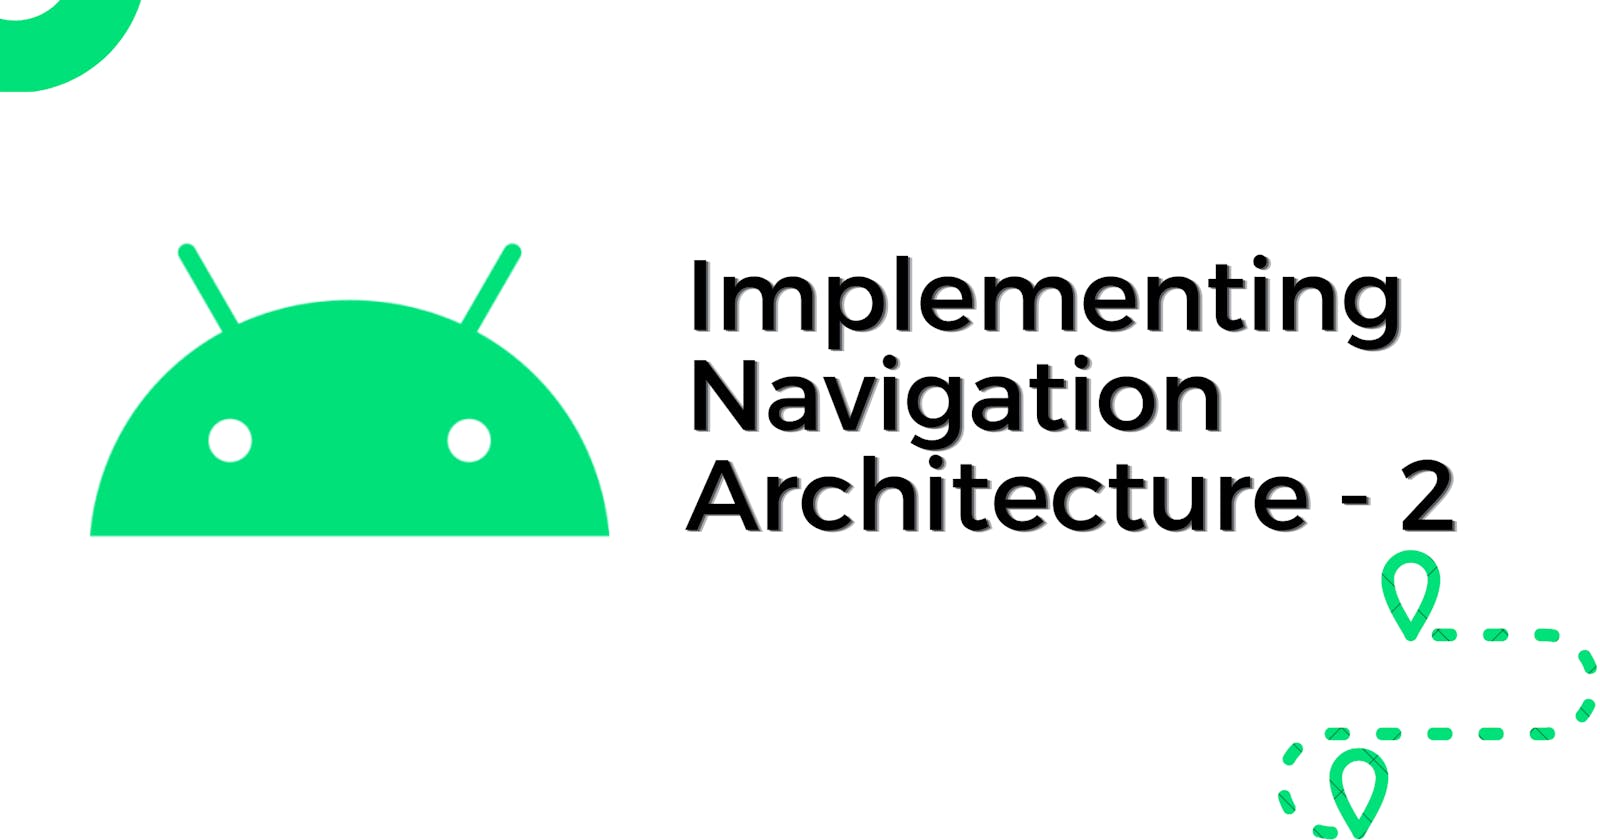 Implementing Navigation Architecture in Android - Part 2